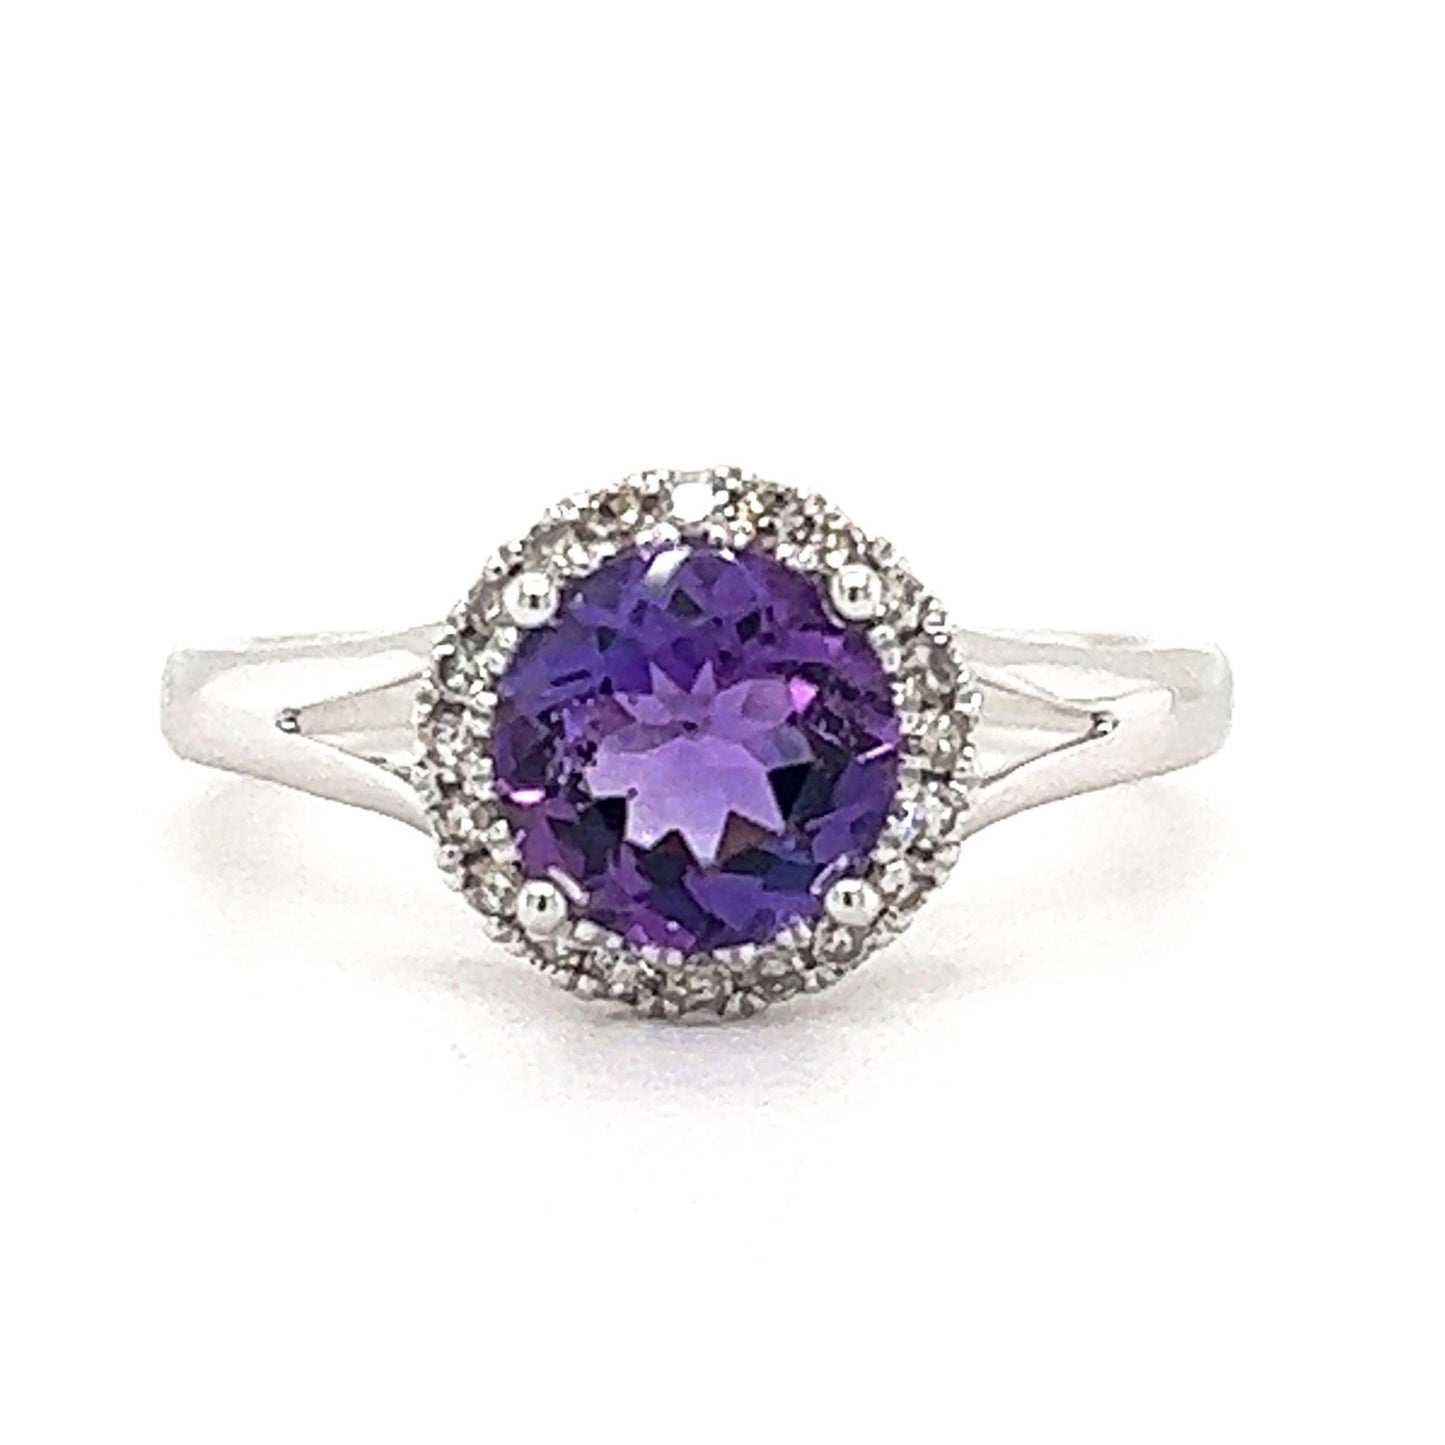 Amethyst Surrounded by Diamonds Ring